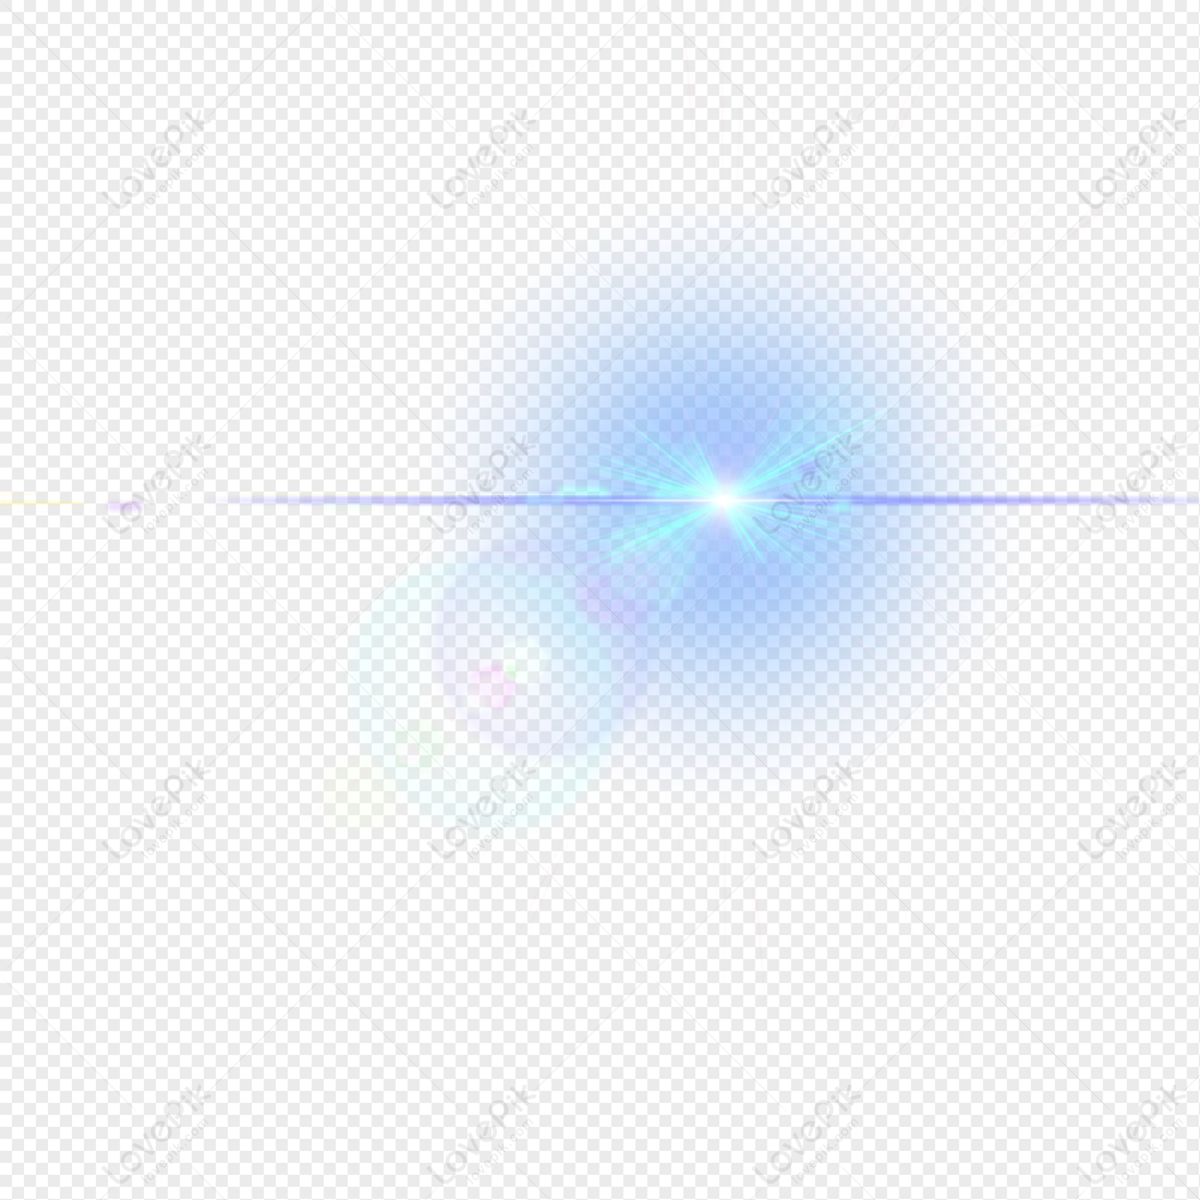 Light Effect PNG Transparent Background And Clipart Image For Free Download  - Lovepik | 401180120